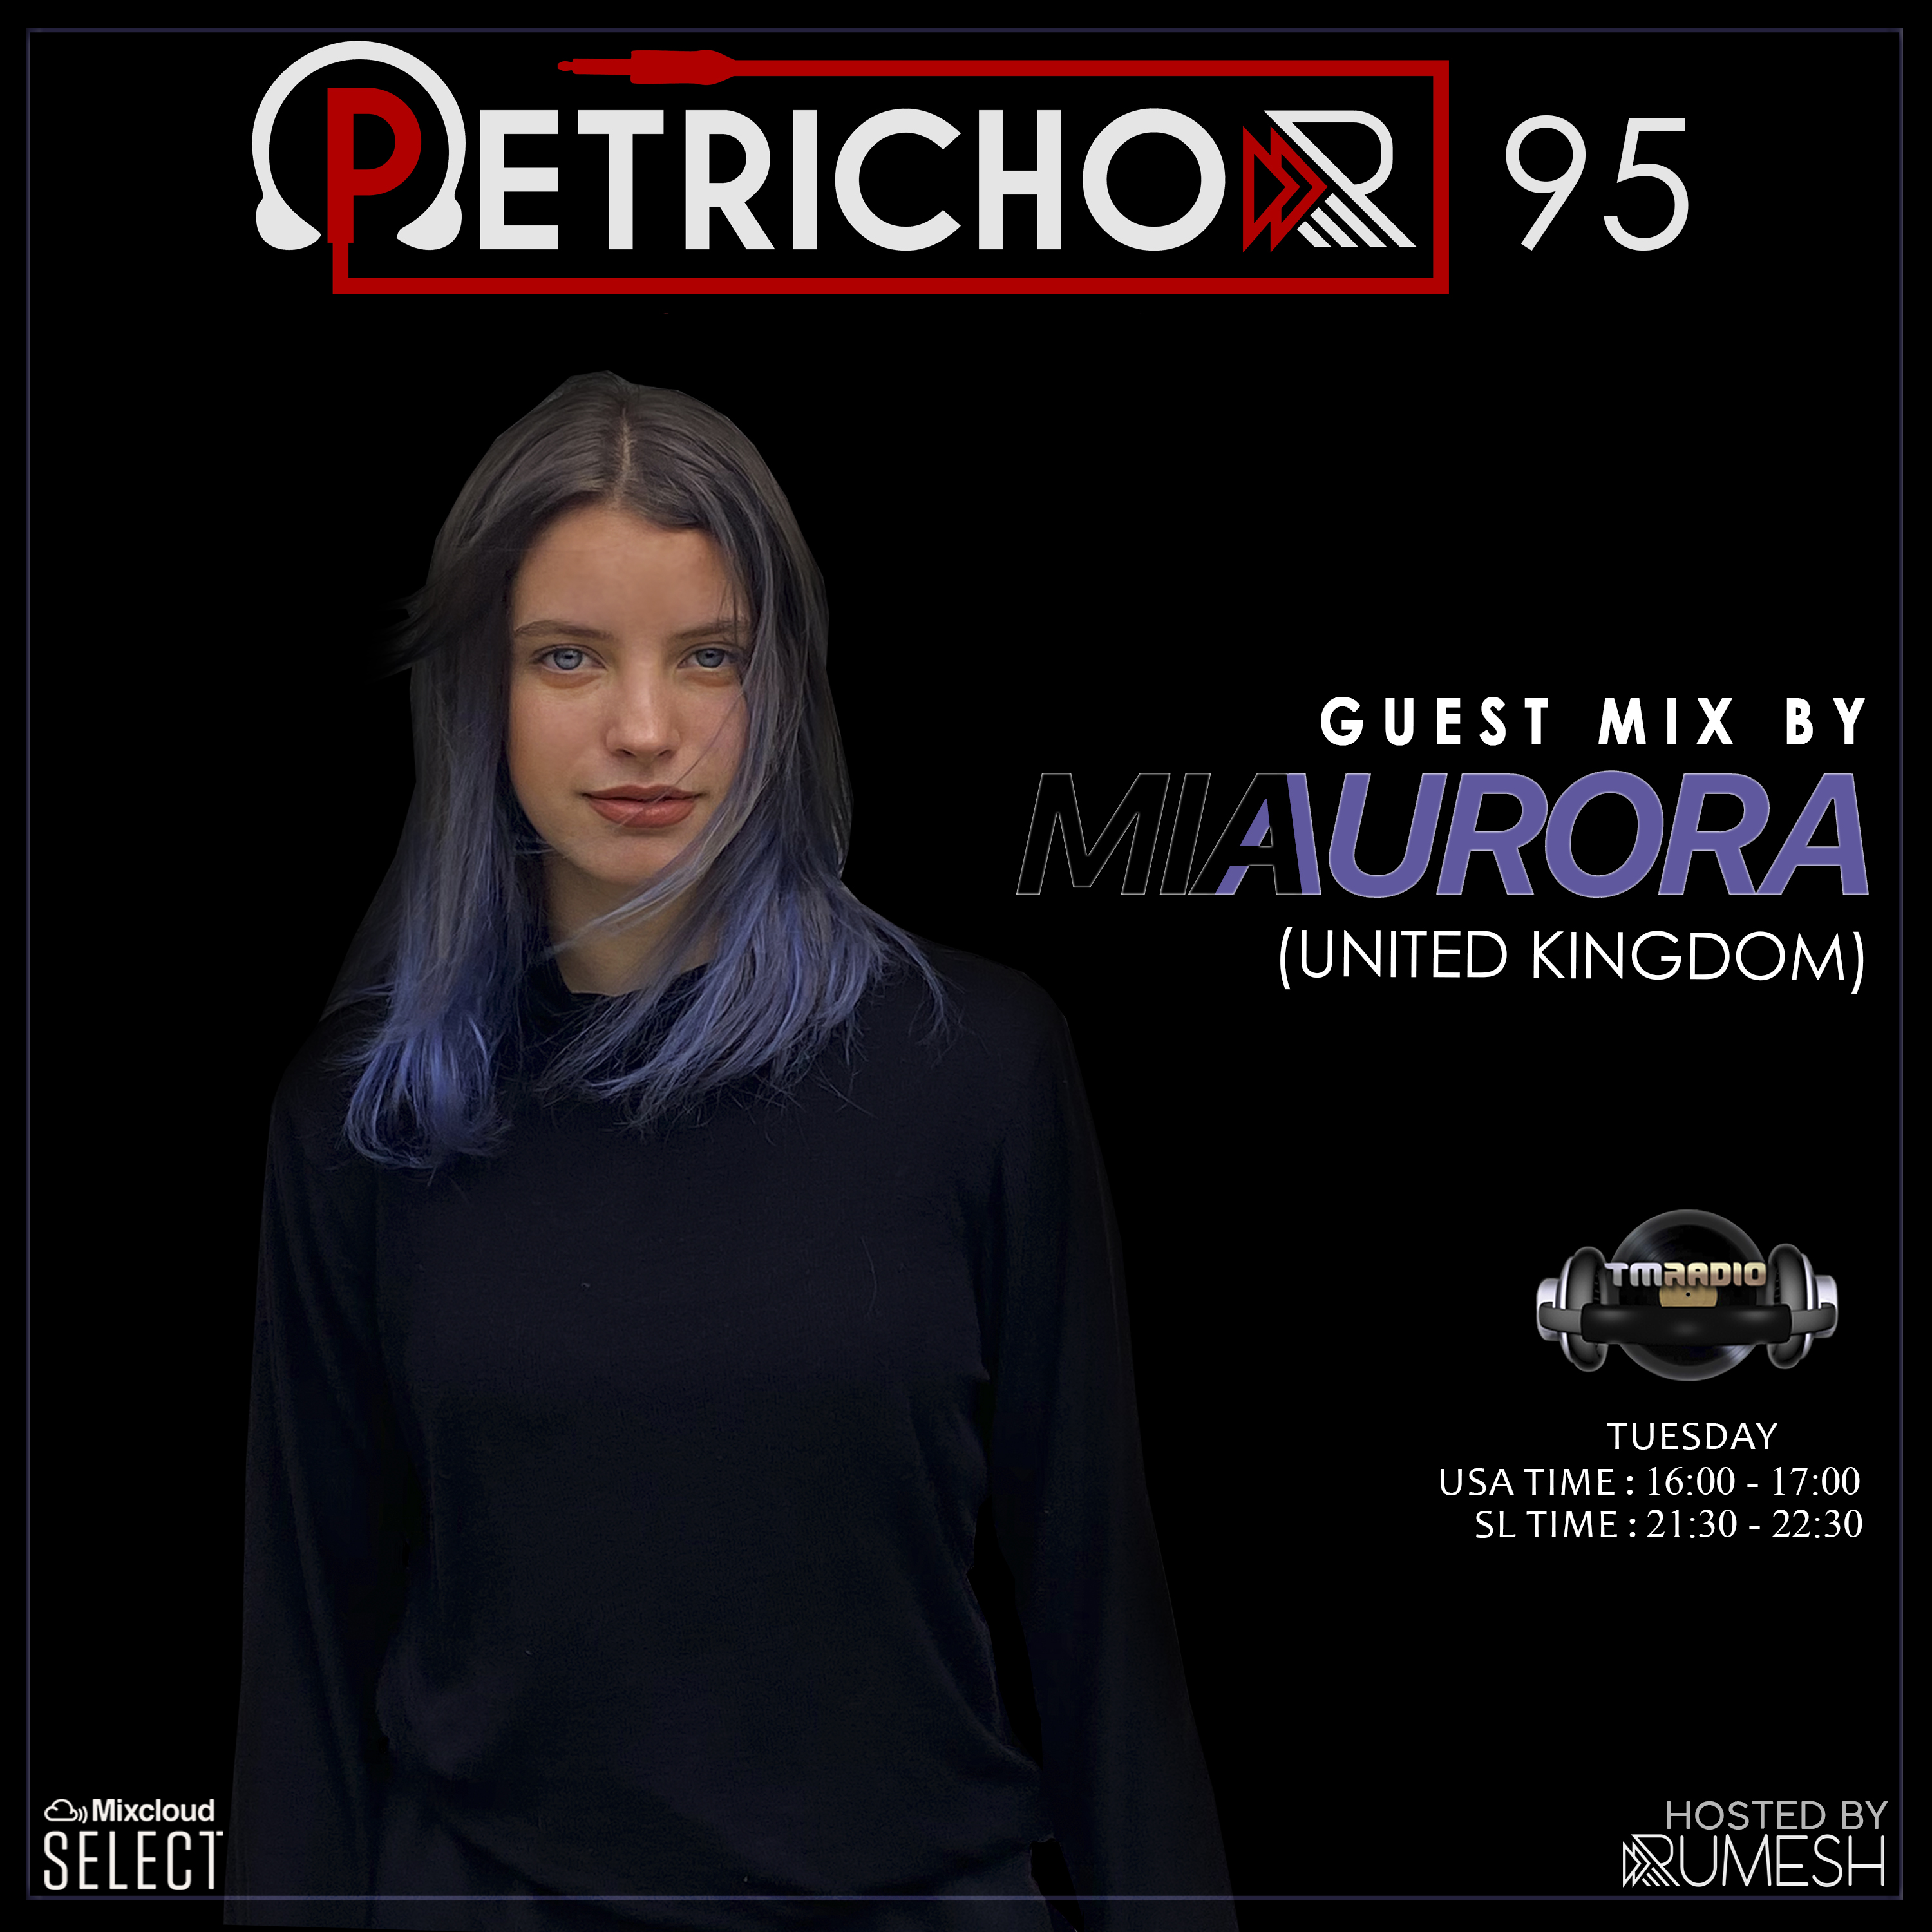 Petrichor :: Petrichor 95 guest mix by Mia Aurora (UK) (aired on December 1st, 2020) banner logo